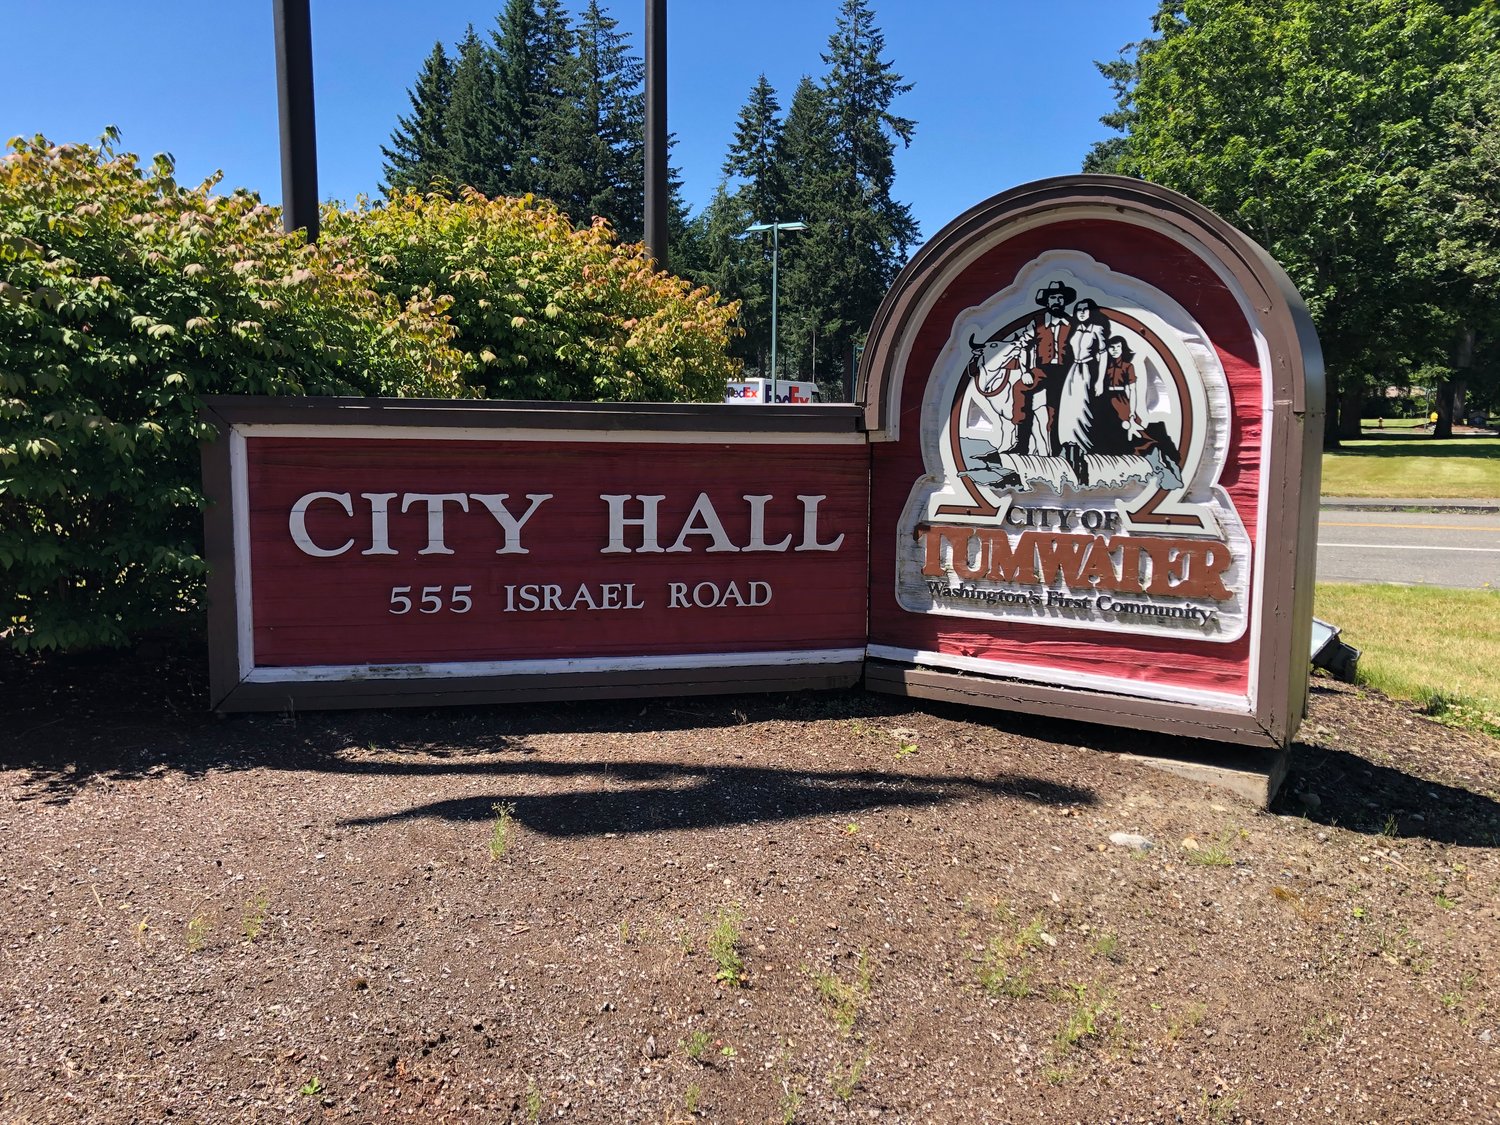 The sign in front of Tumwater City Hall shows the city's logo.